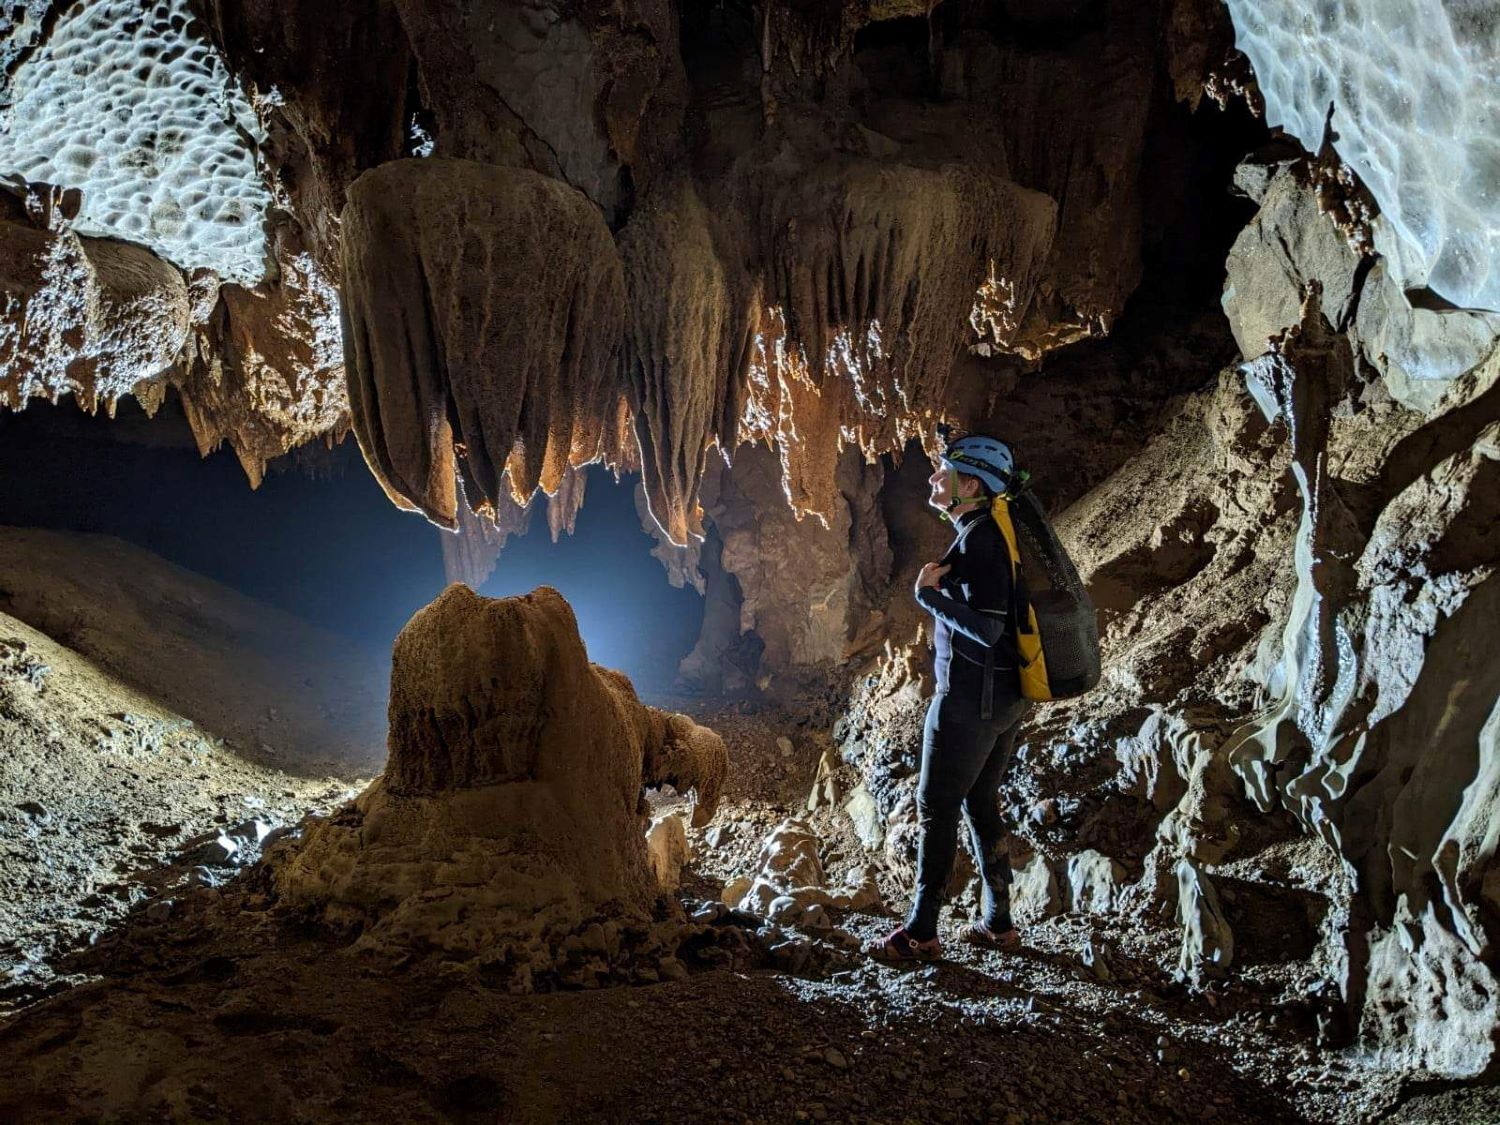 Lam Hoa commune with a magical stalactite cave system.